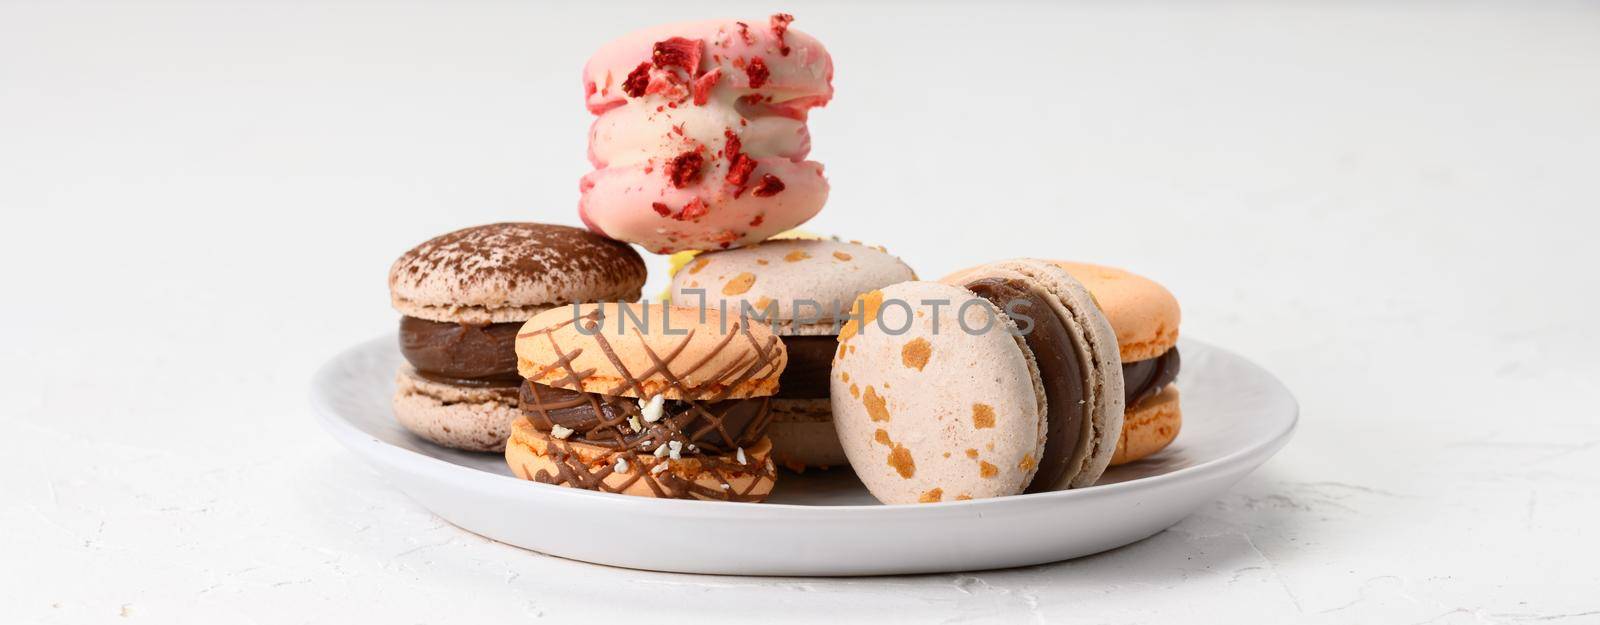 baked almond macarons on a white ceramic plate, white background